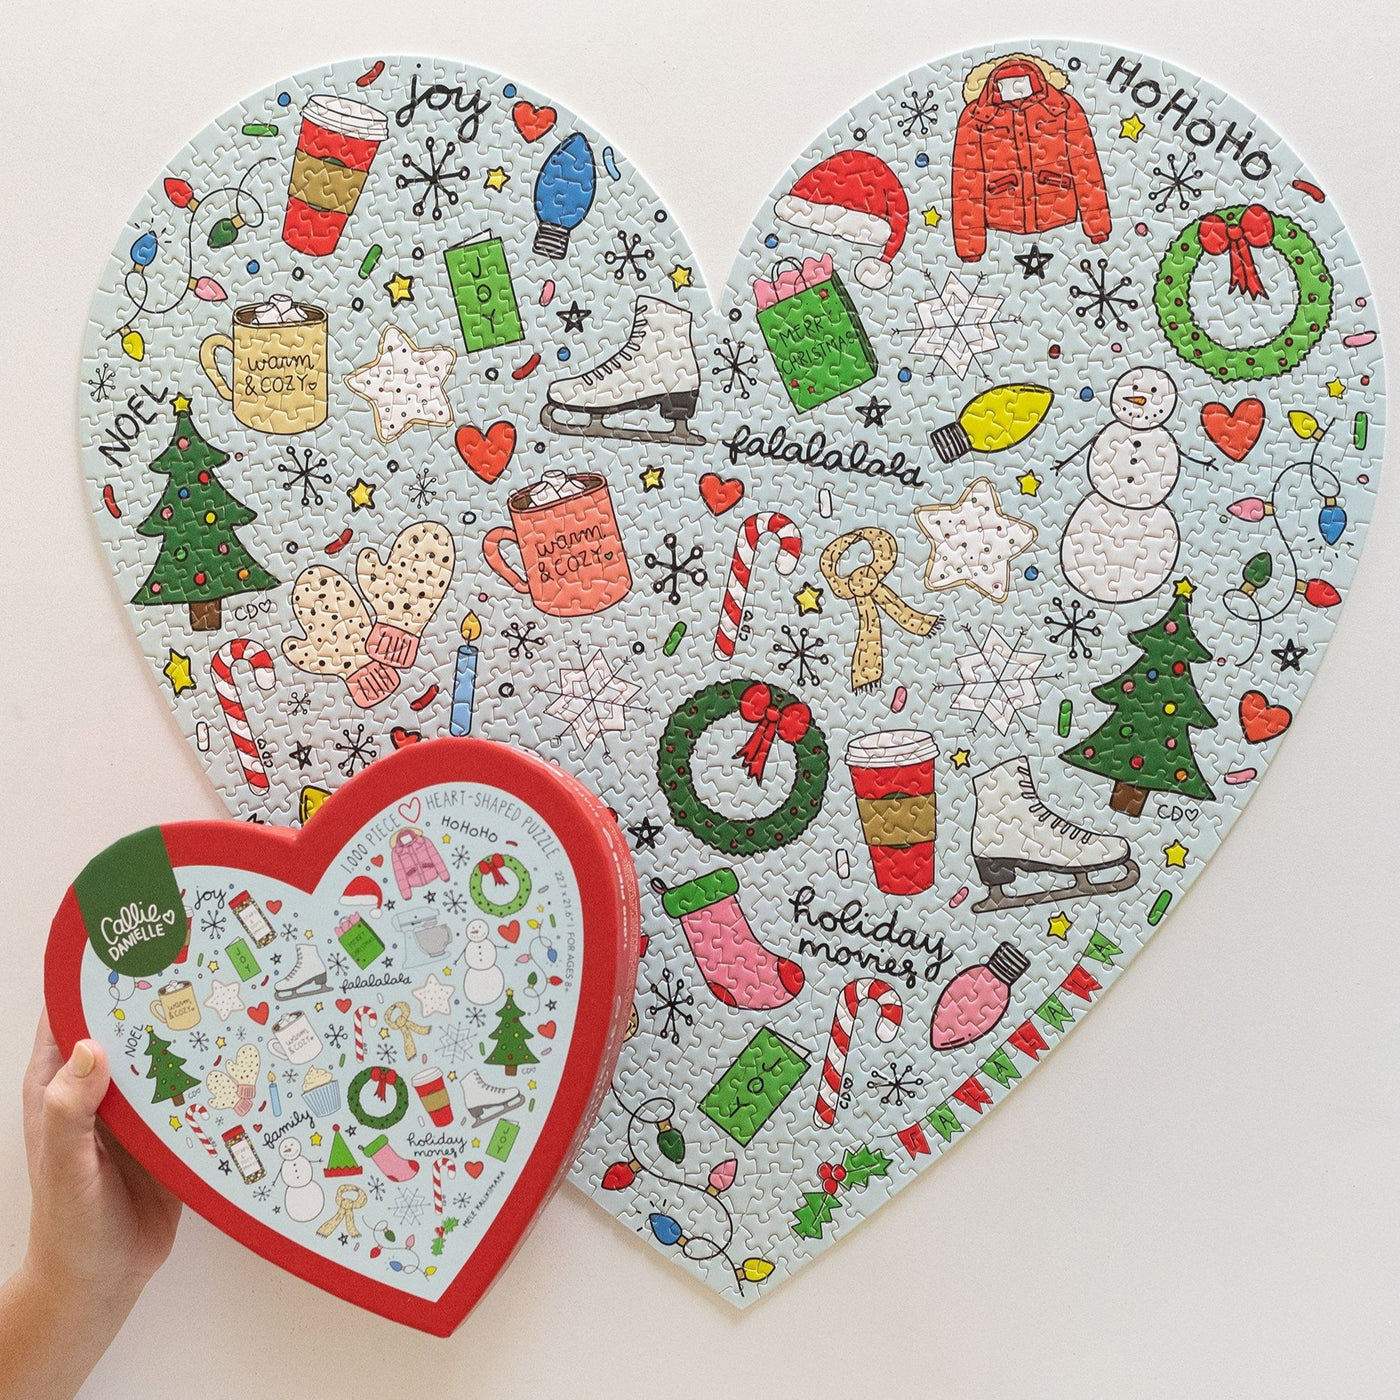 Love For Christmas | 1,000 Piece Jigsaw Puzzle